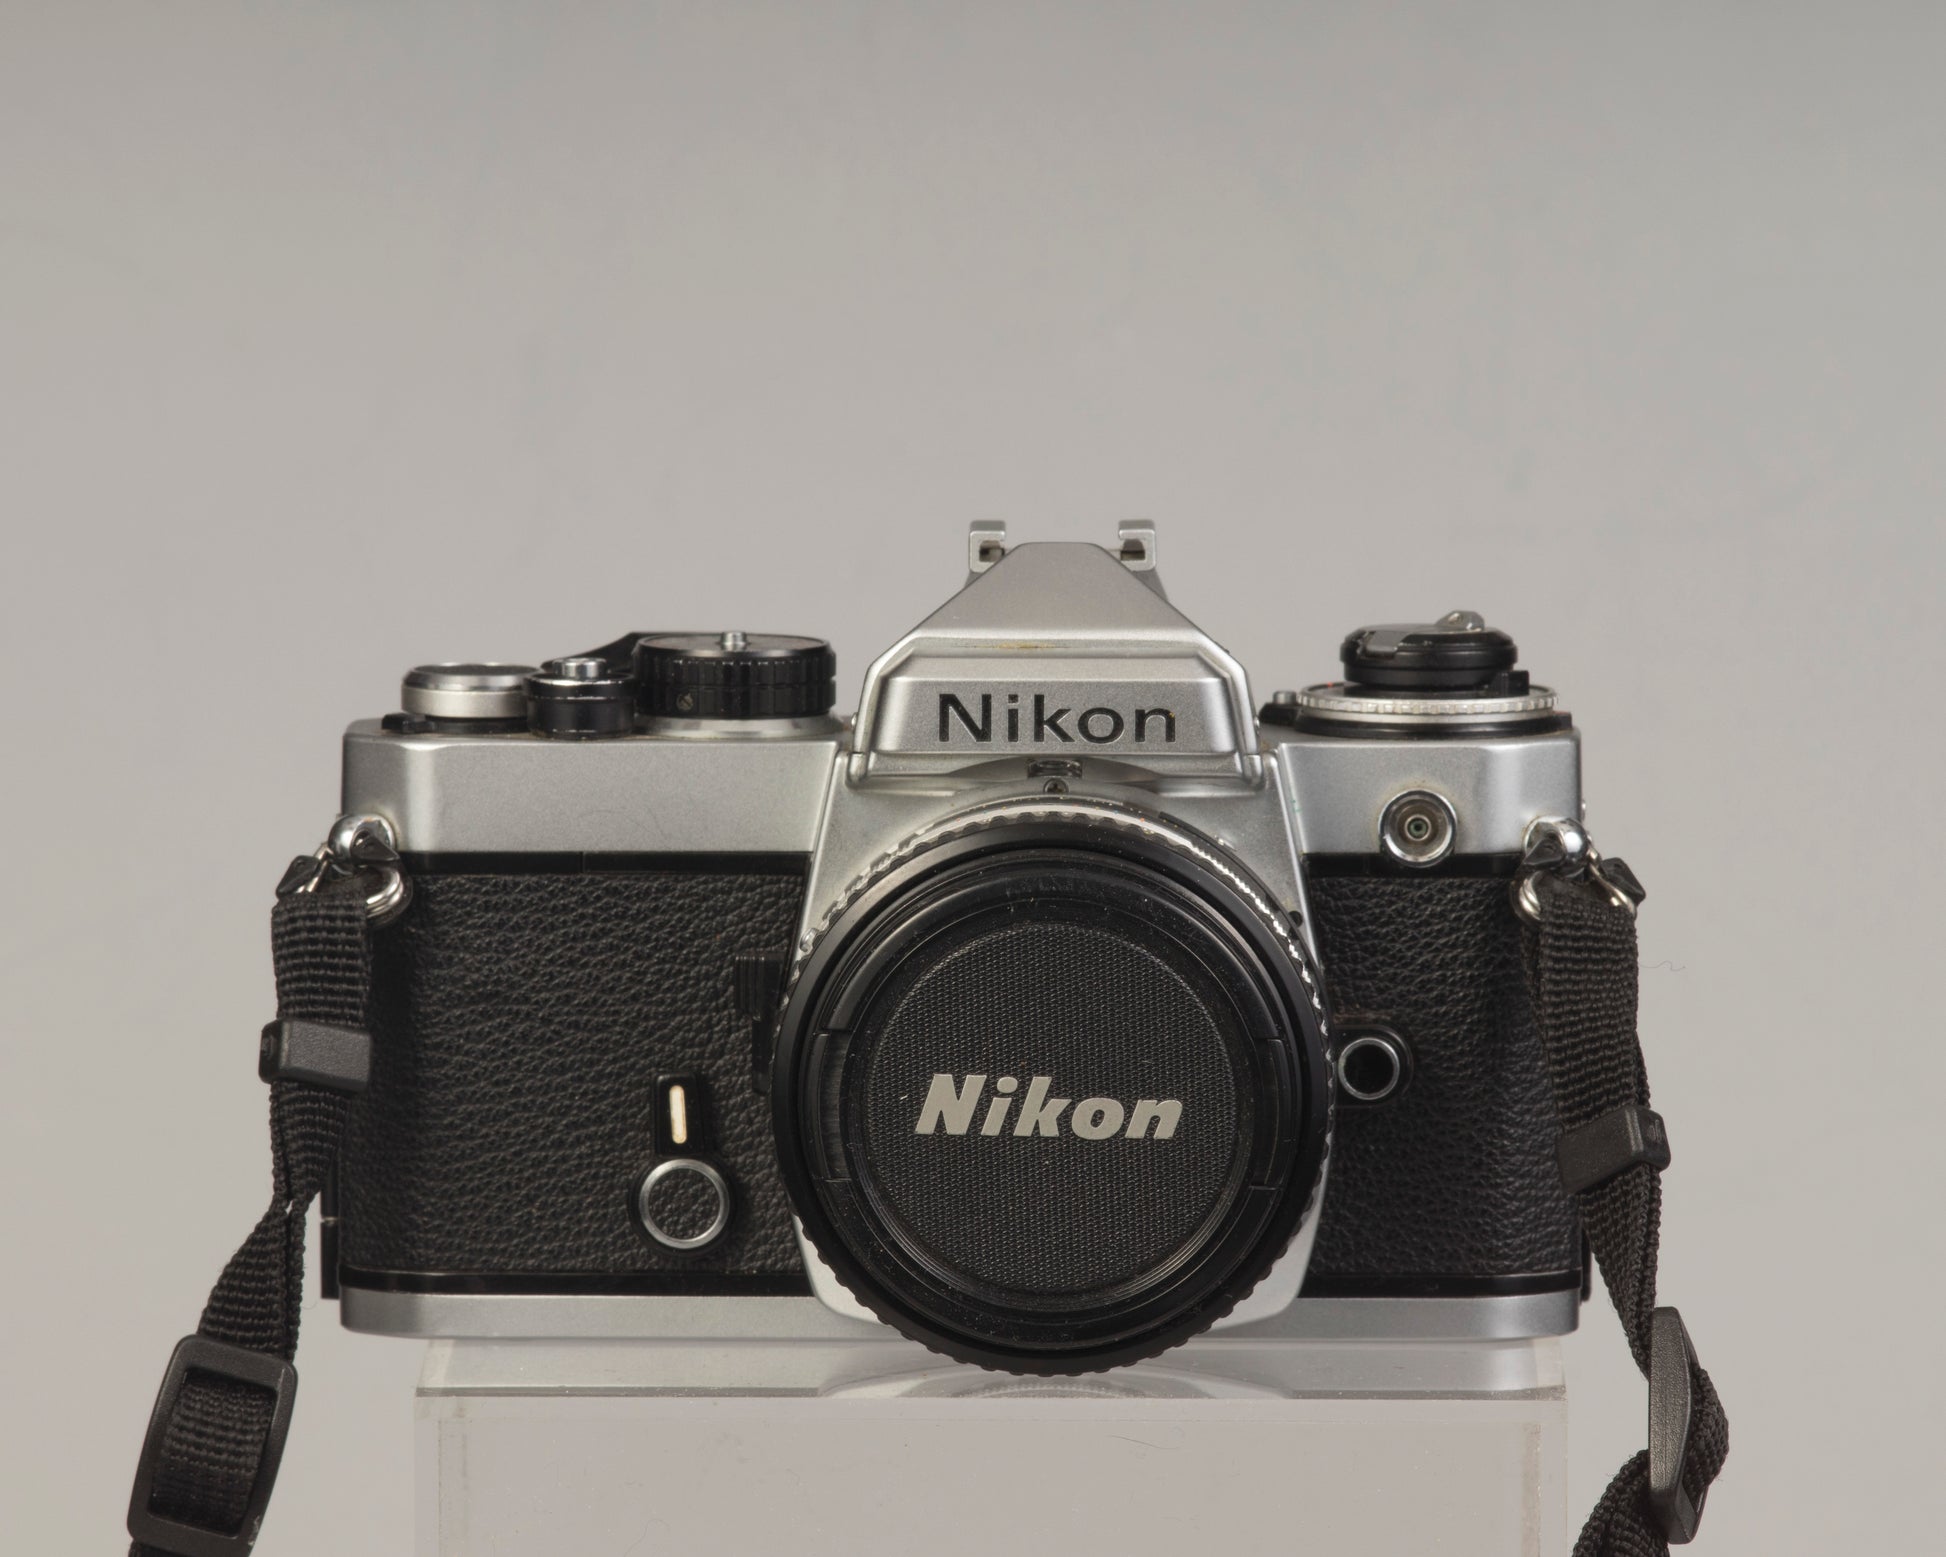 Nikon FE 35mm film SLR camera with Nikon E 50mm f1.8 lens. Available at New Wave Pool, Montreal.